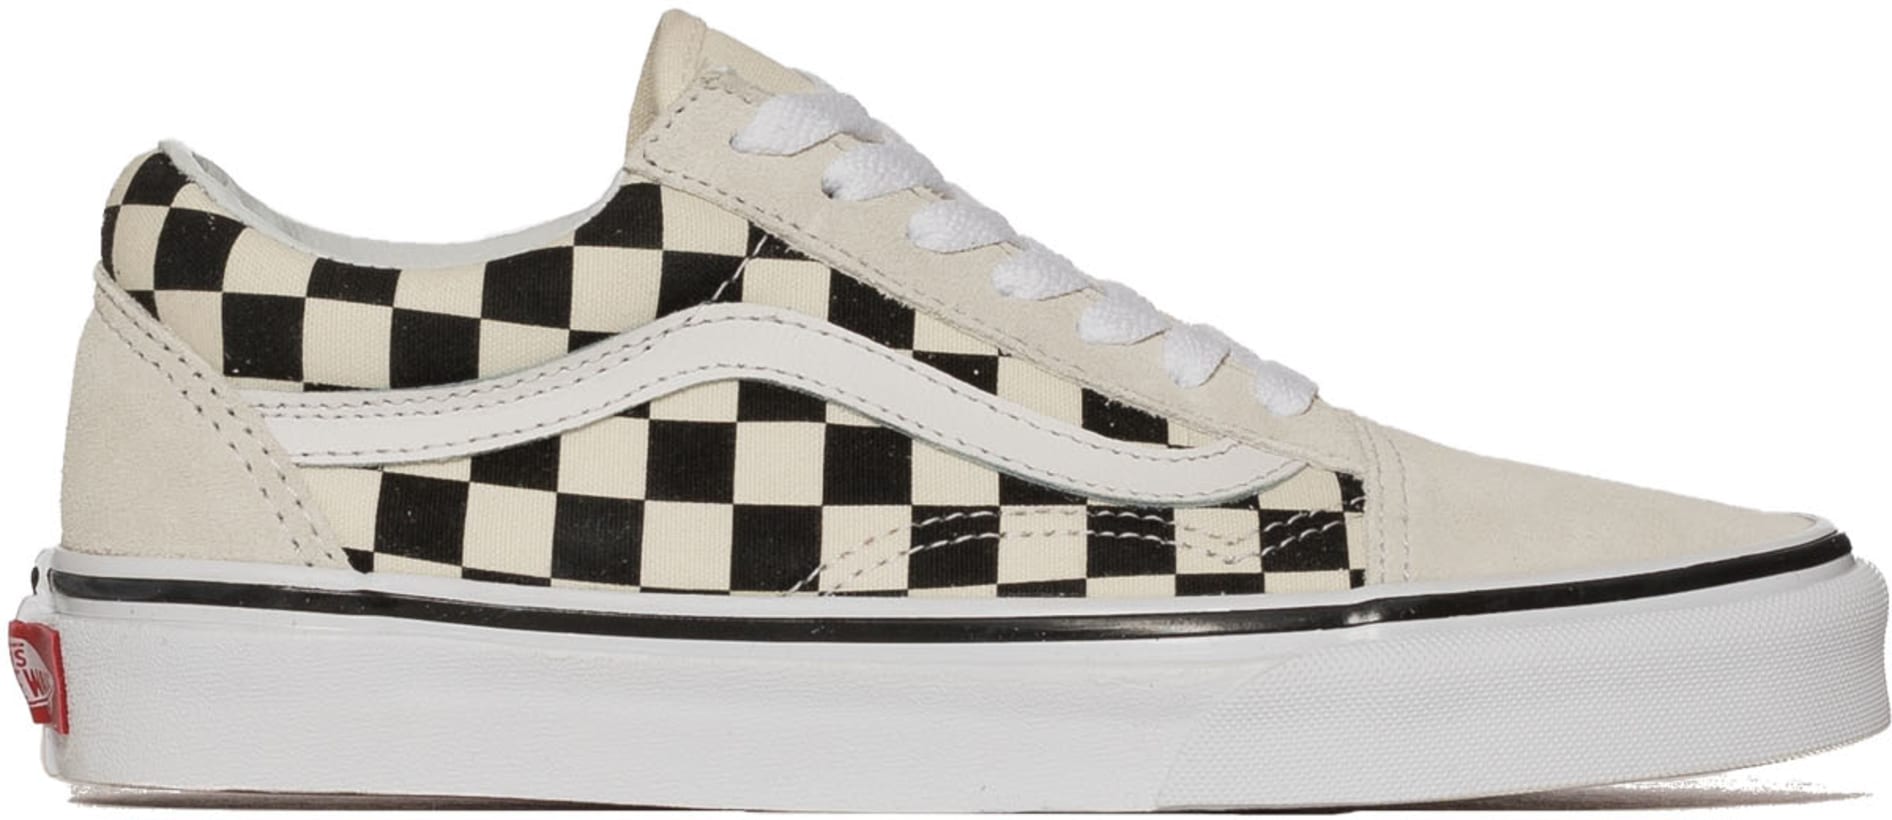 primary check old skool womens